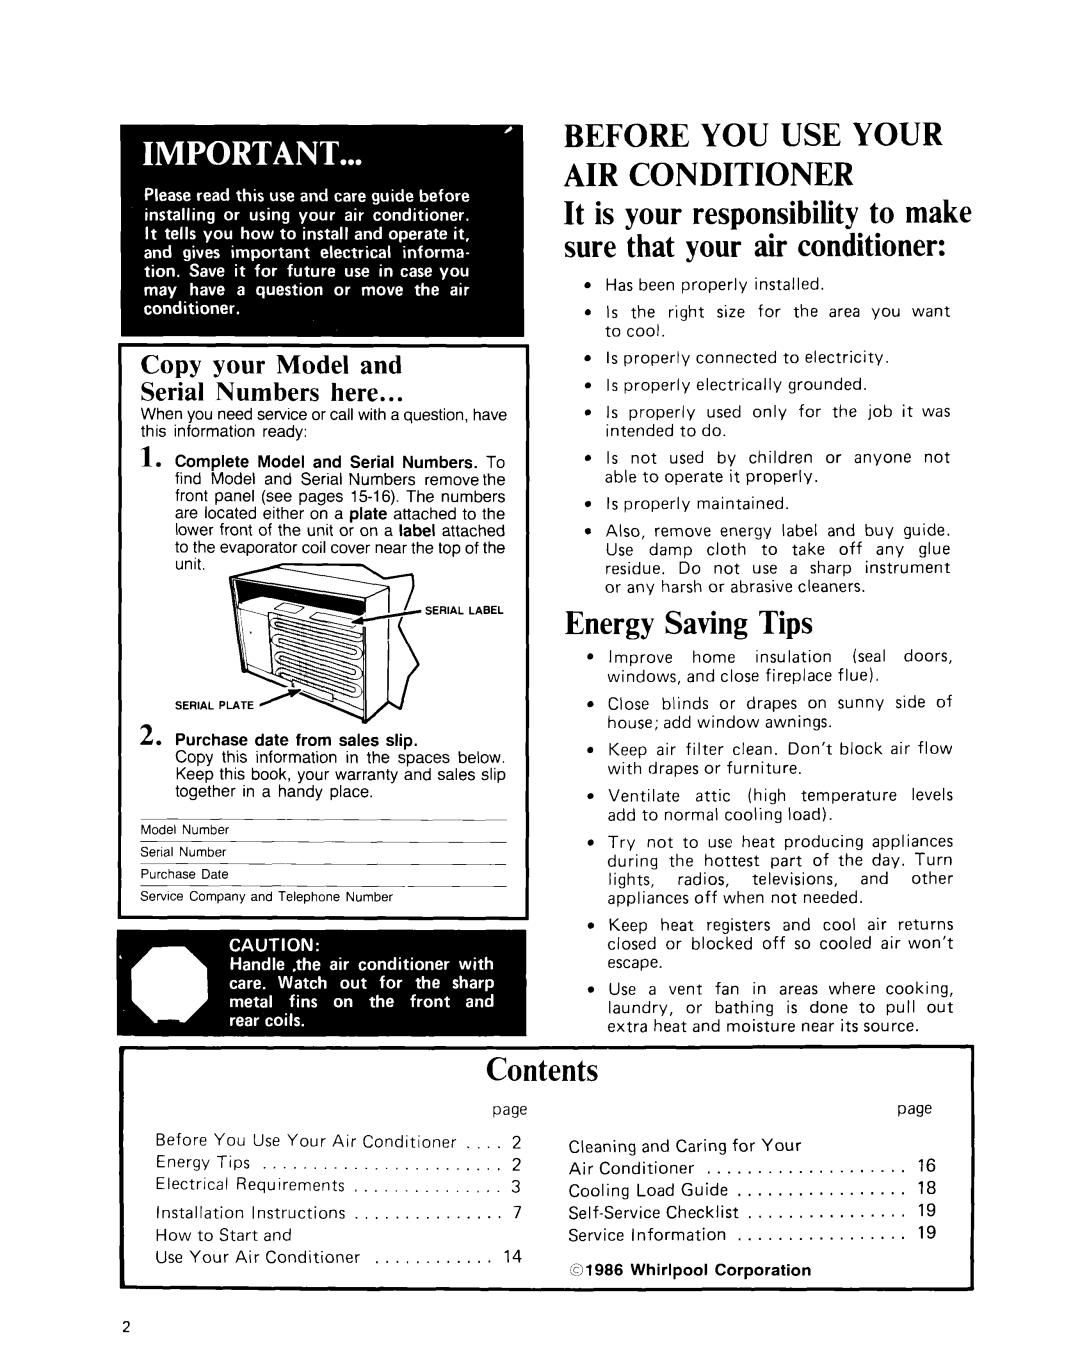 Whirlpool CAW21D2A1 manual Energy SavingTips, Contents, Before You Use Your Air Conditioner, page 